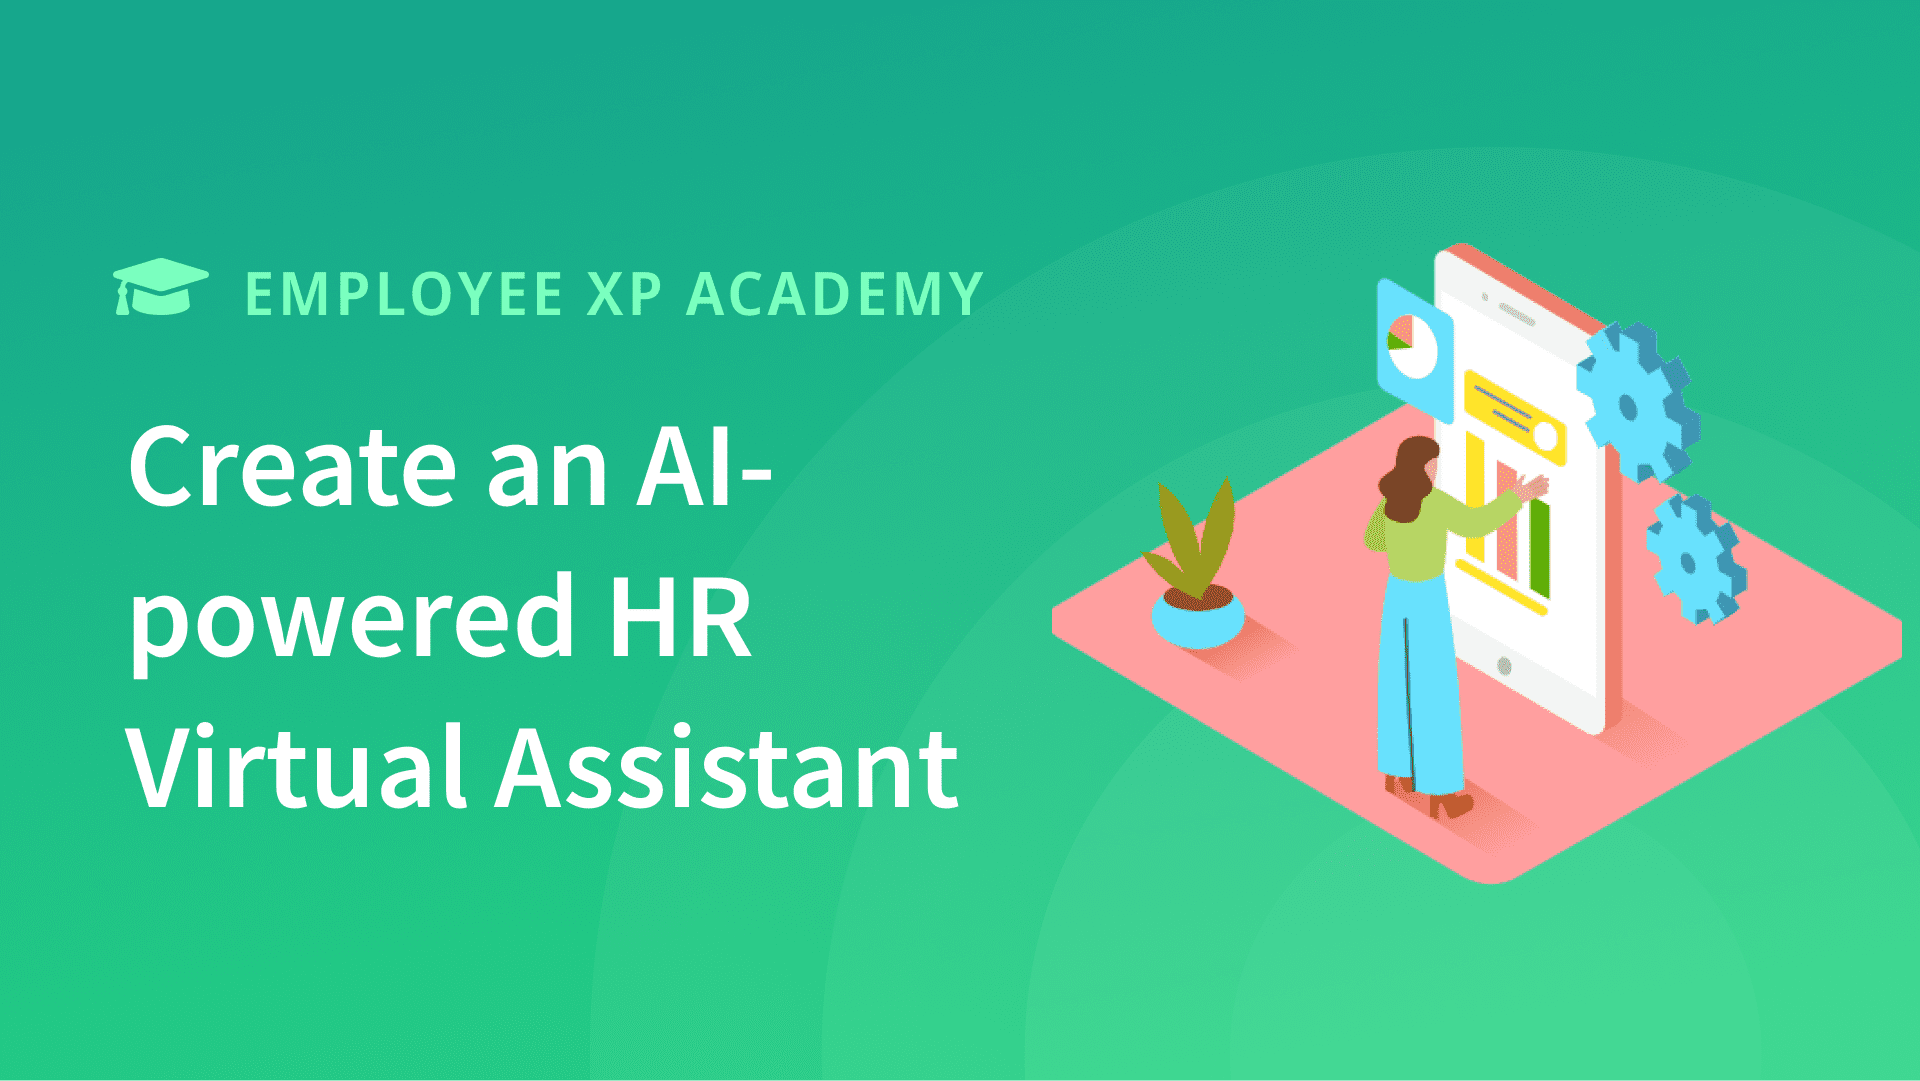 How to create an AI-powered HR Virtual Assistant people will love using?